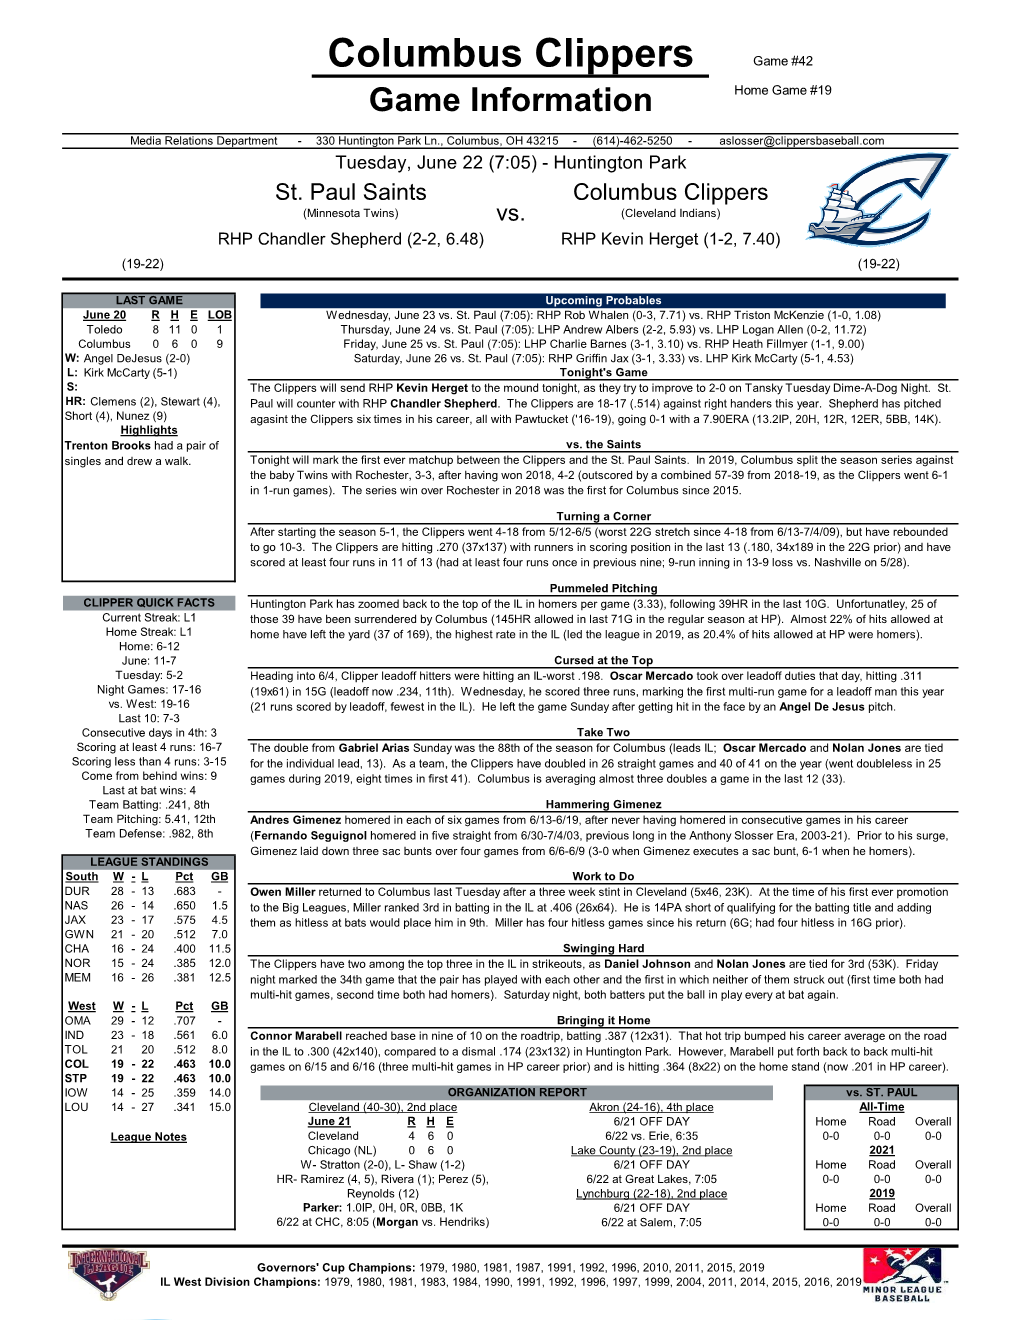 Columbus Clippers Game #42 Game Information Home Game #19